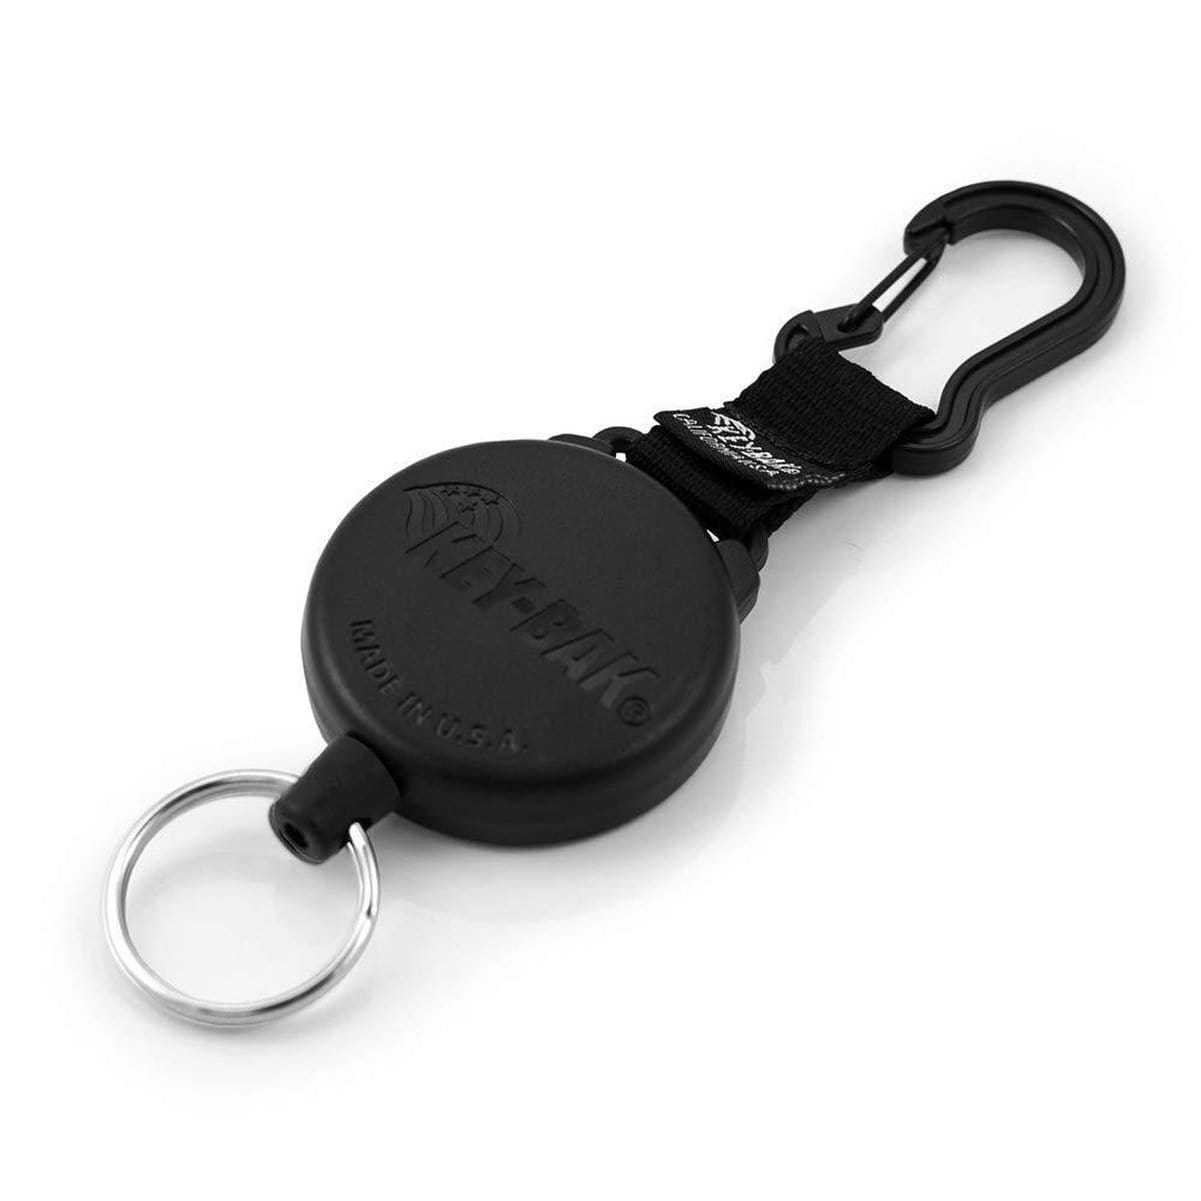 4 Durable Badge Reels To Make Your Life Easier –